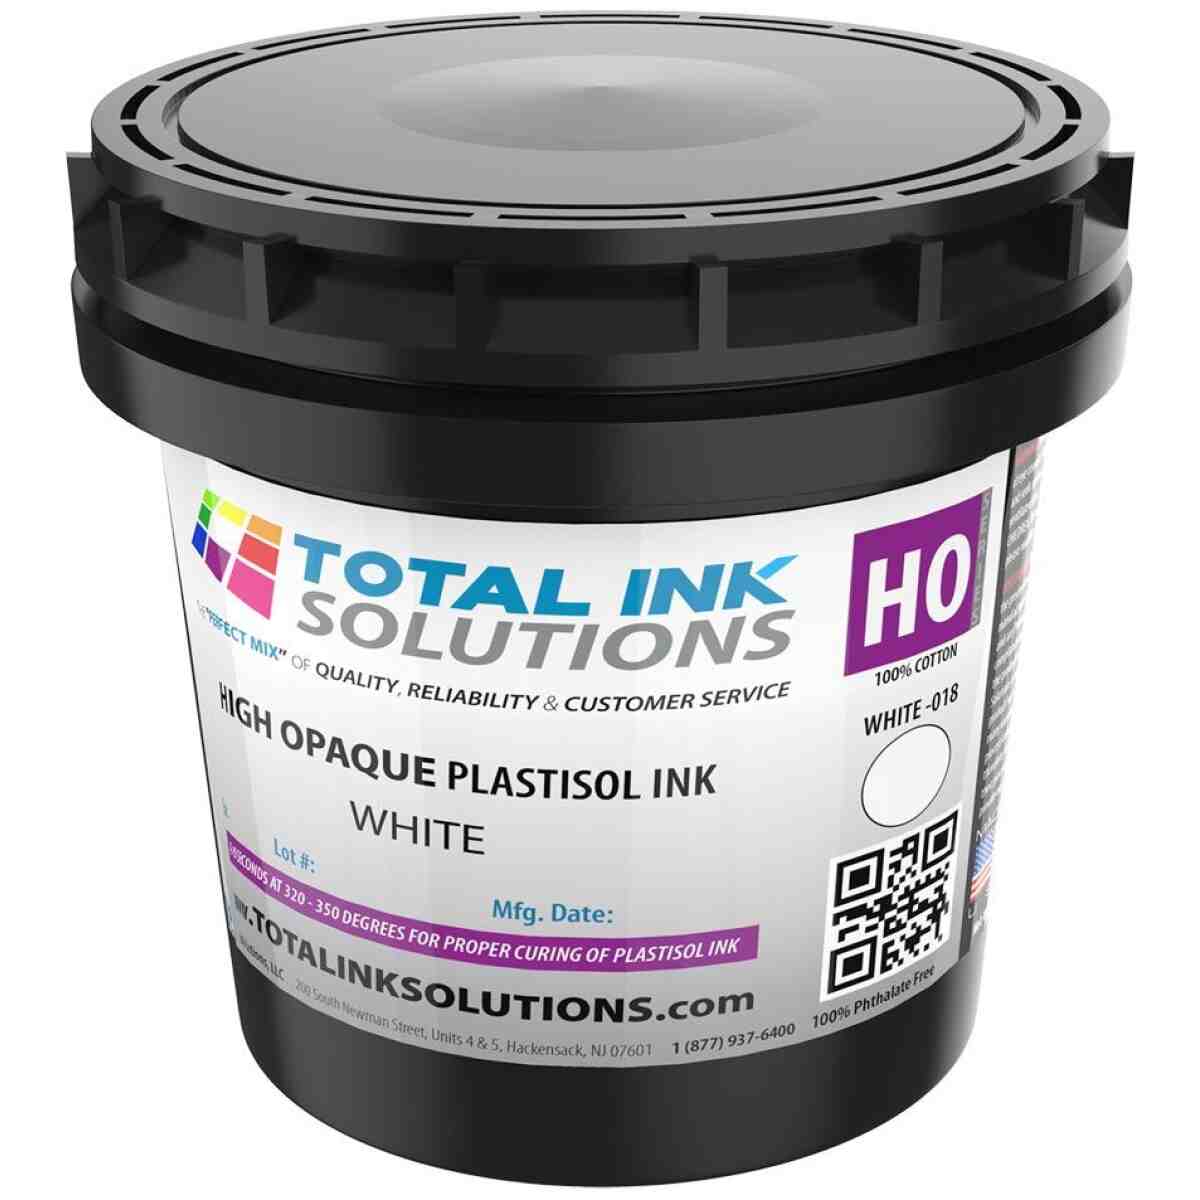 High Opaque Plastisol Ink - White - Quart TOTAL INK SOLUTIONS®